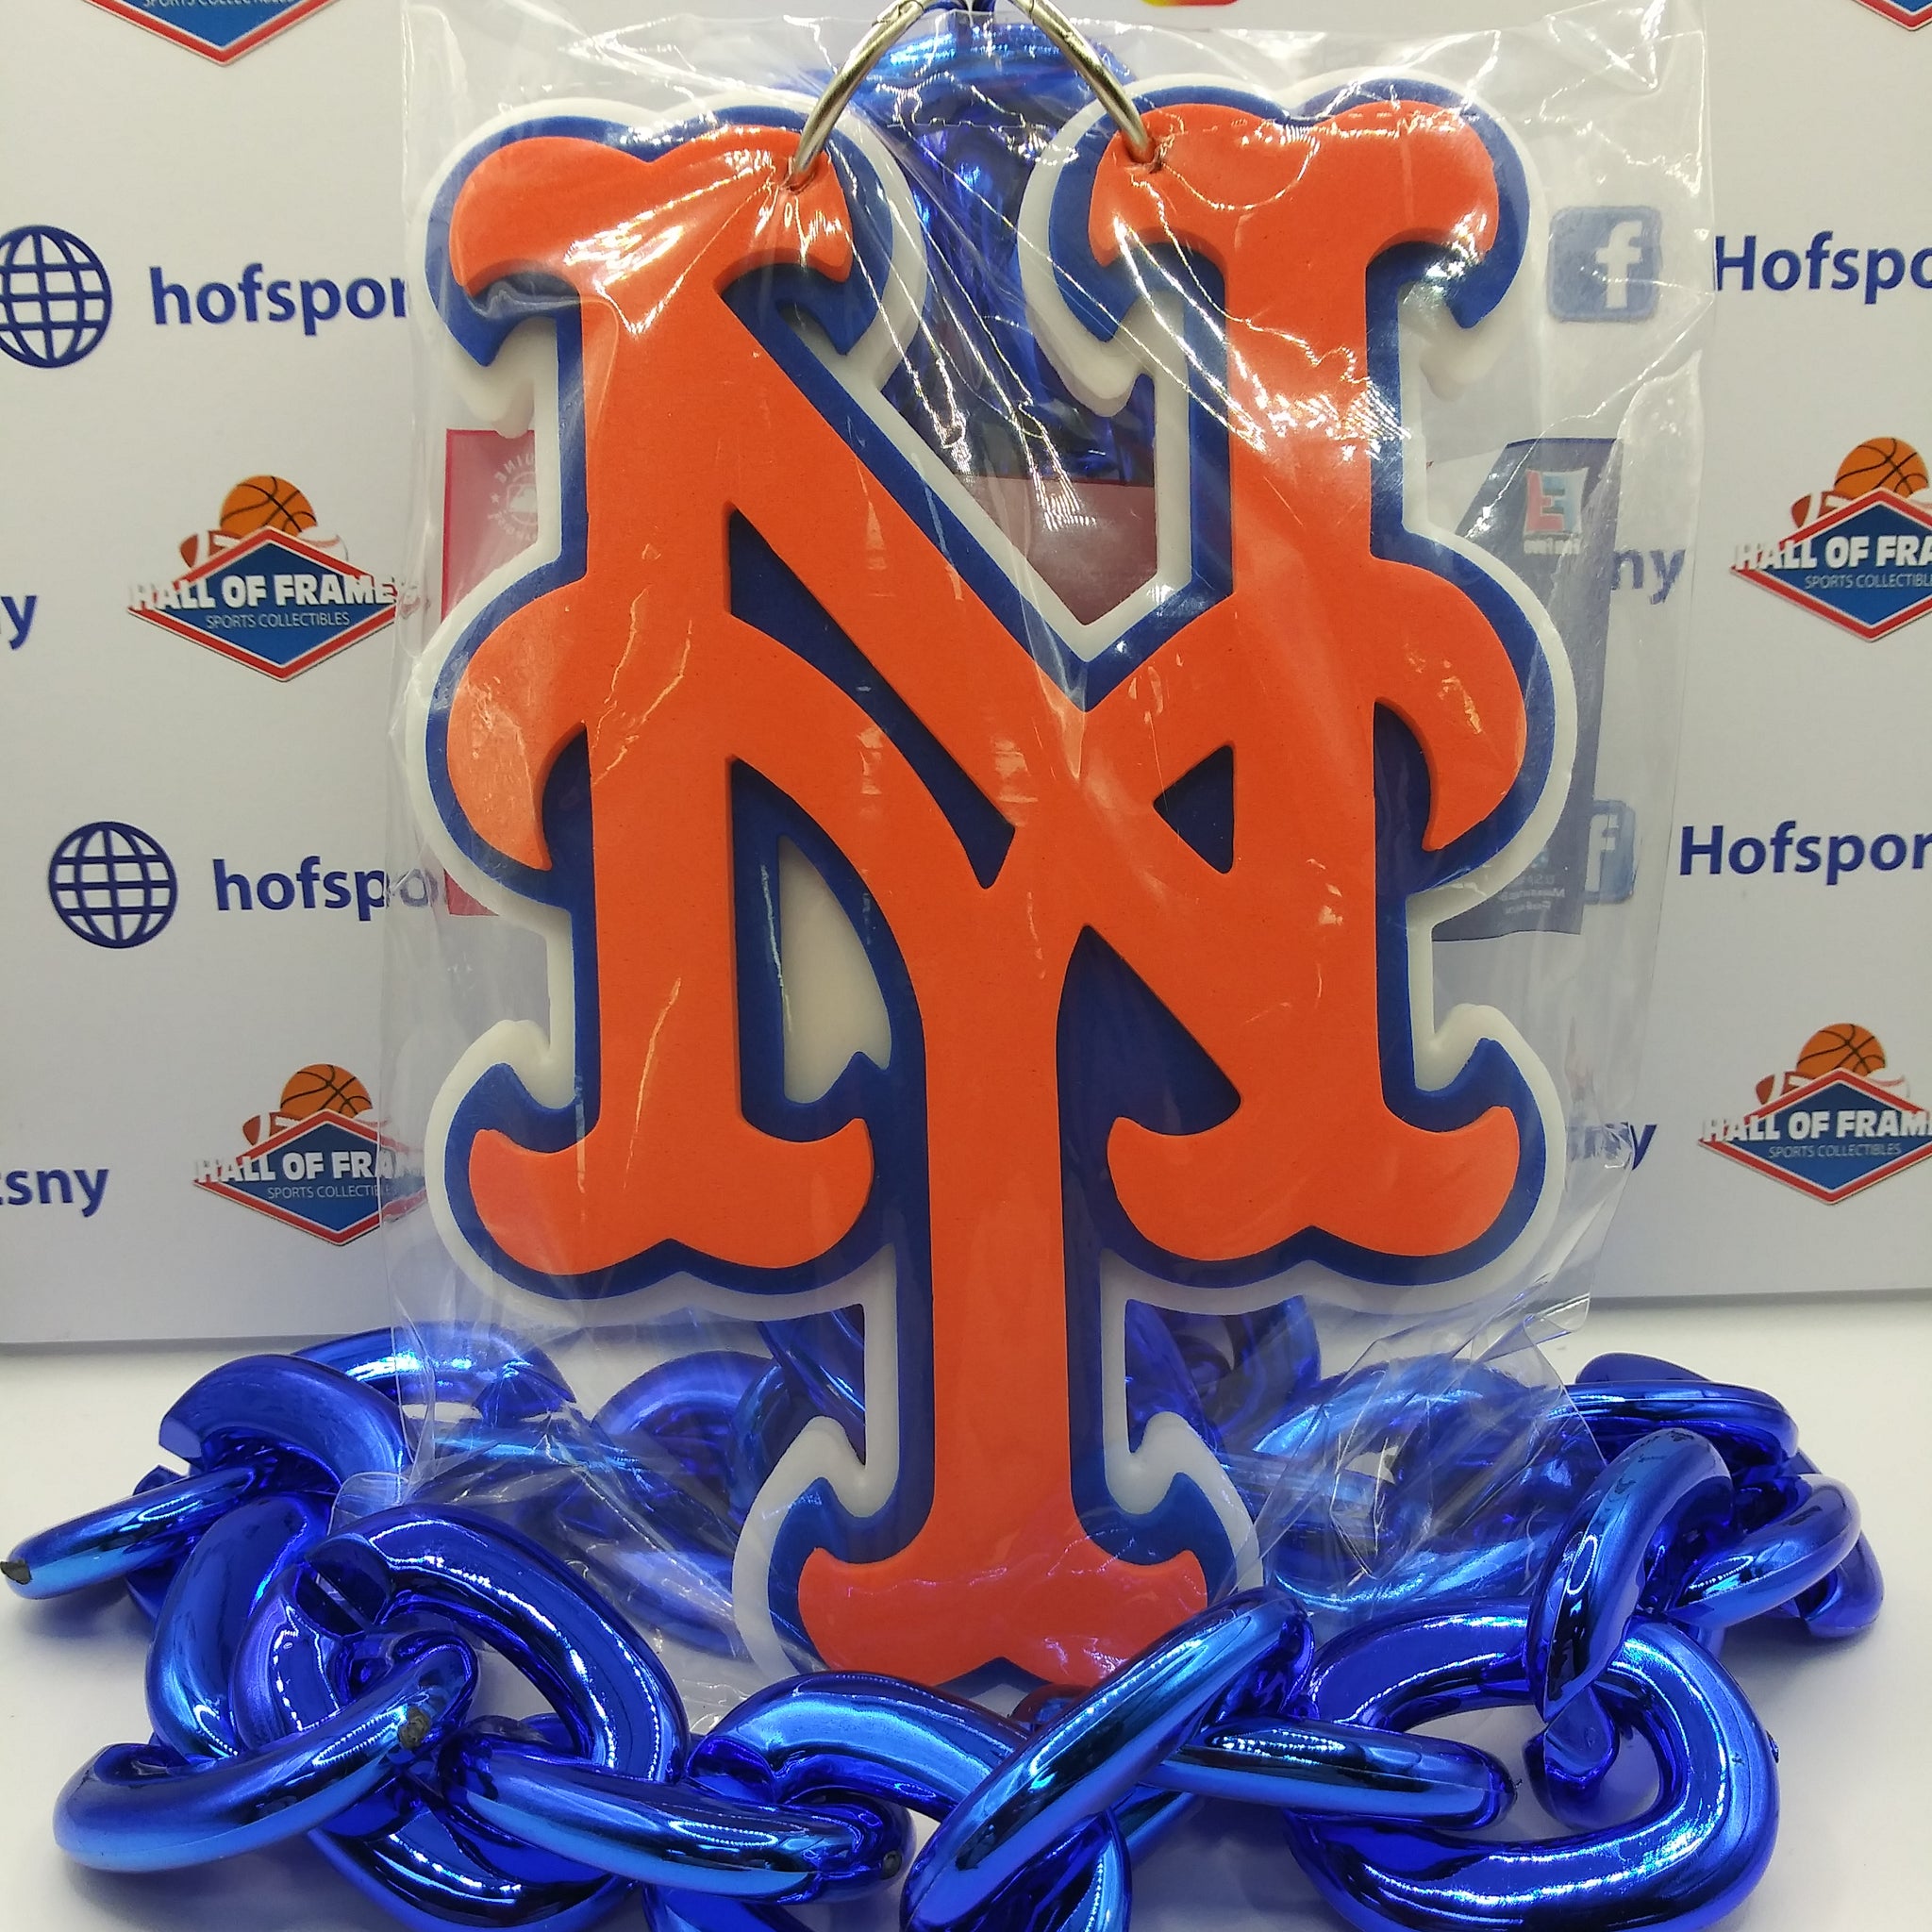 NEW YORK METS FANCHAIN BY FANFAVE!